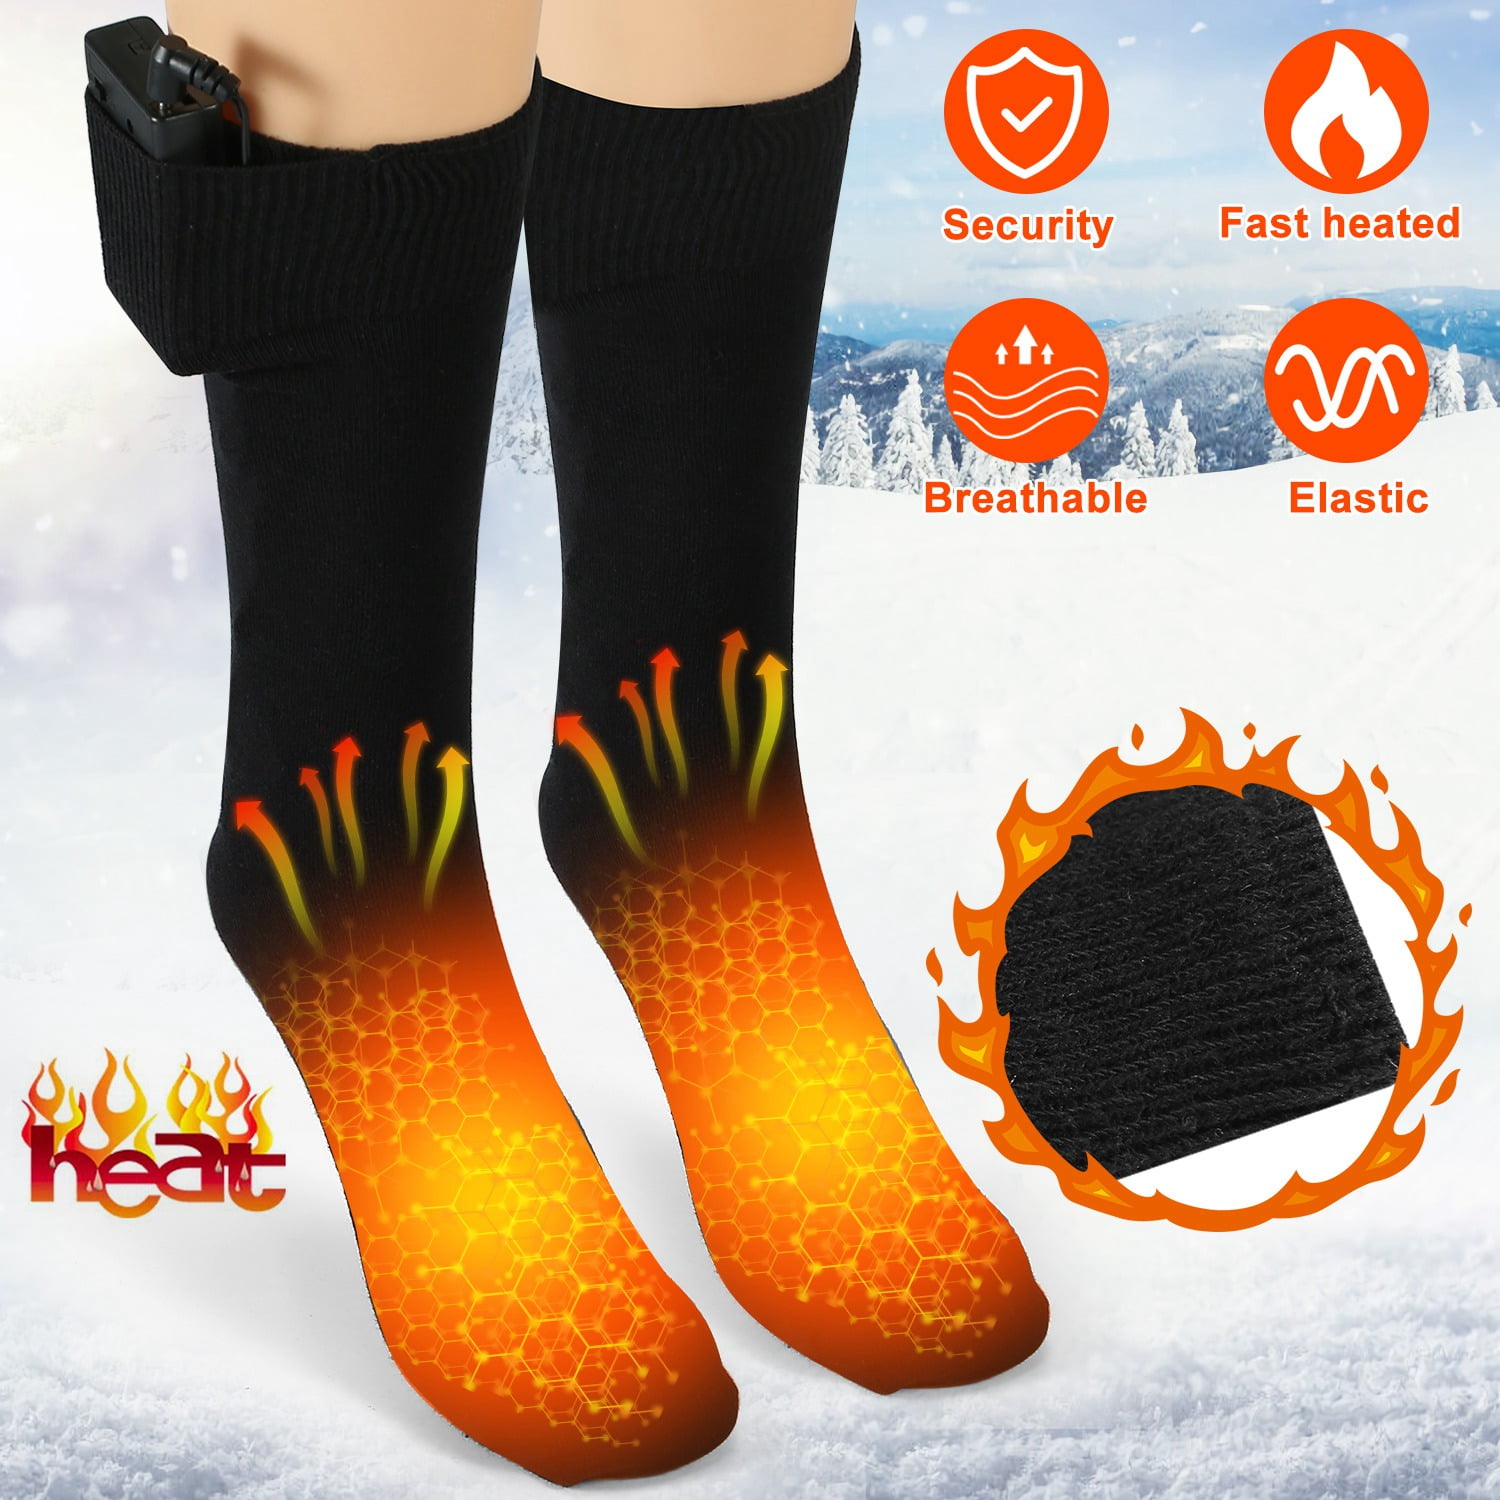 US Hot Chargable Battery Electric Heated Socks Boot Feet Warmer Winter Outdoor 